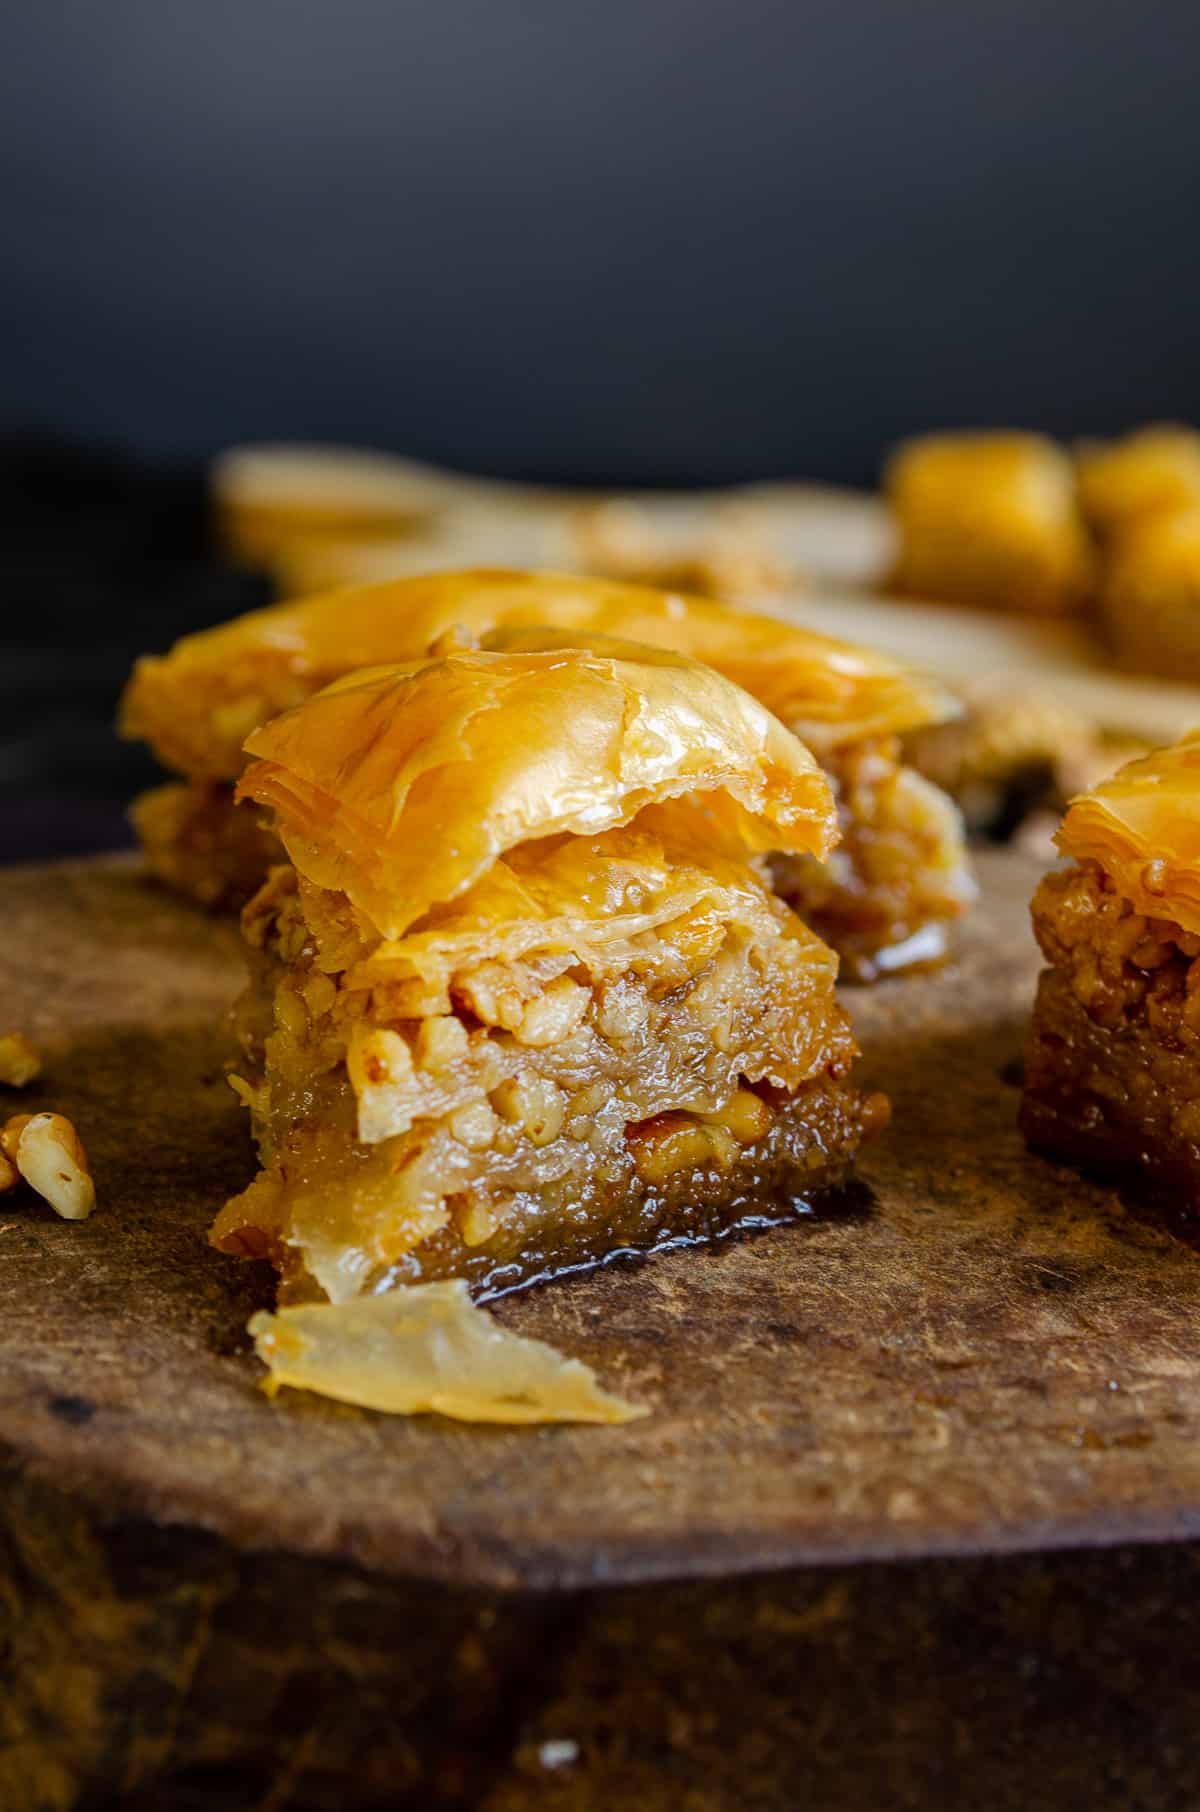 A close shot of a baklava slice filled with walnuts on a wooden serving board.